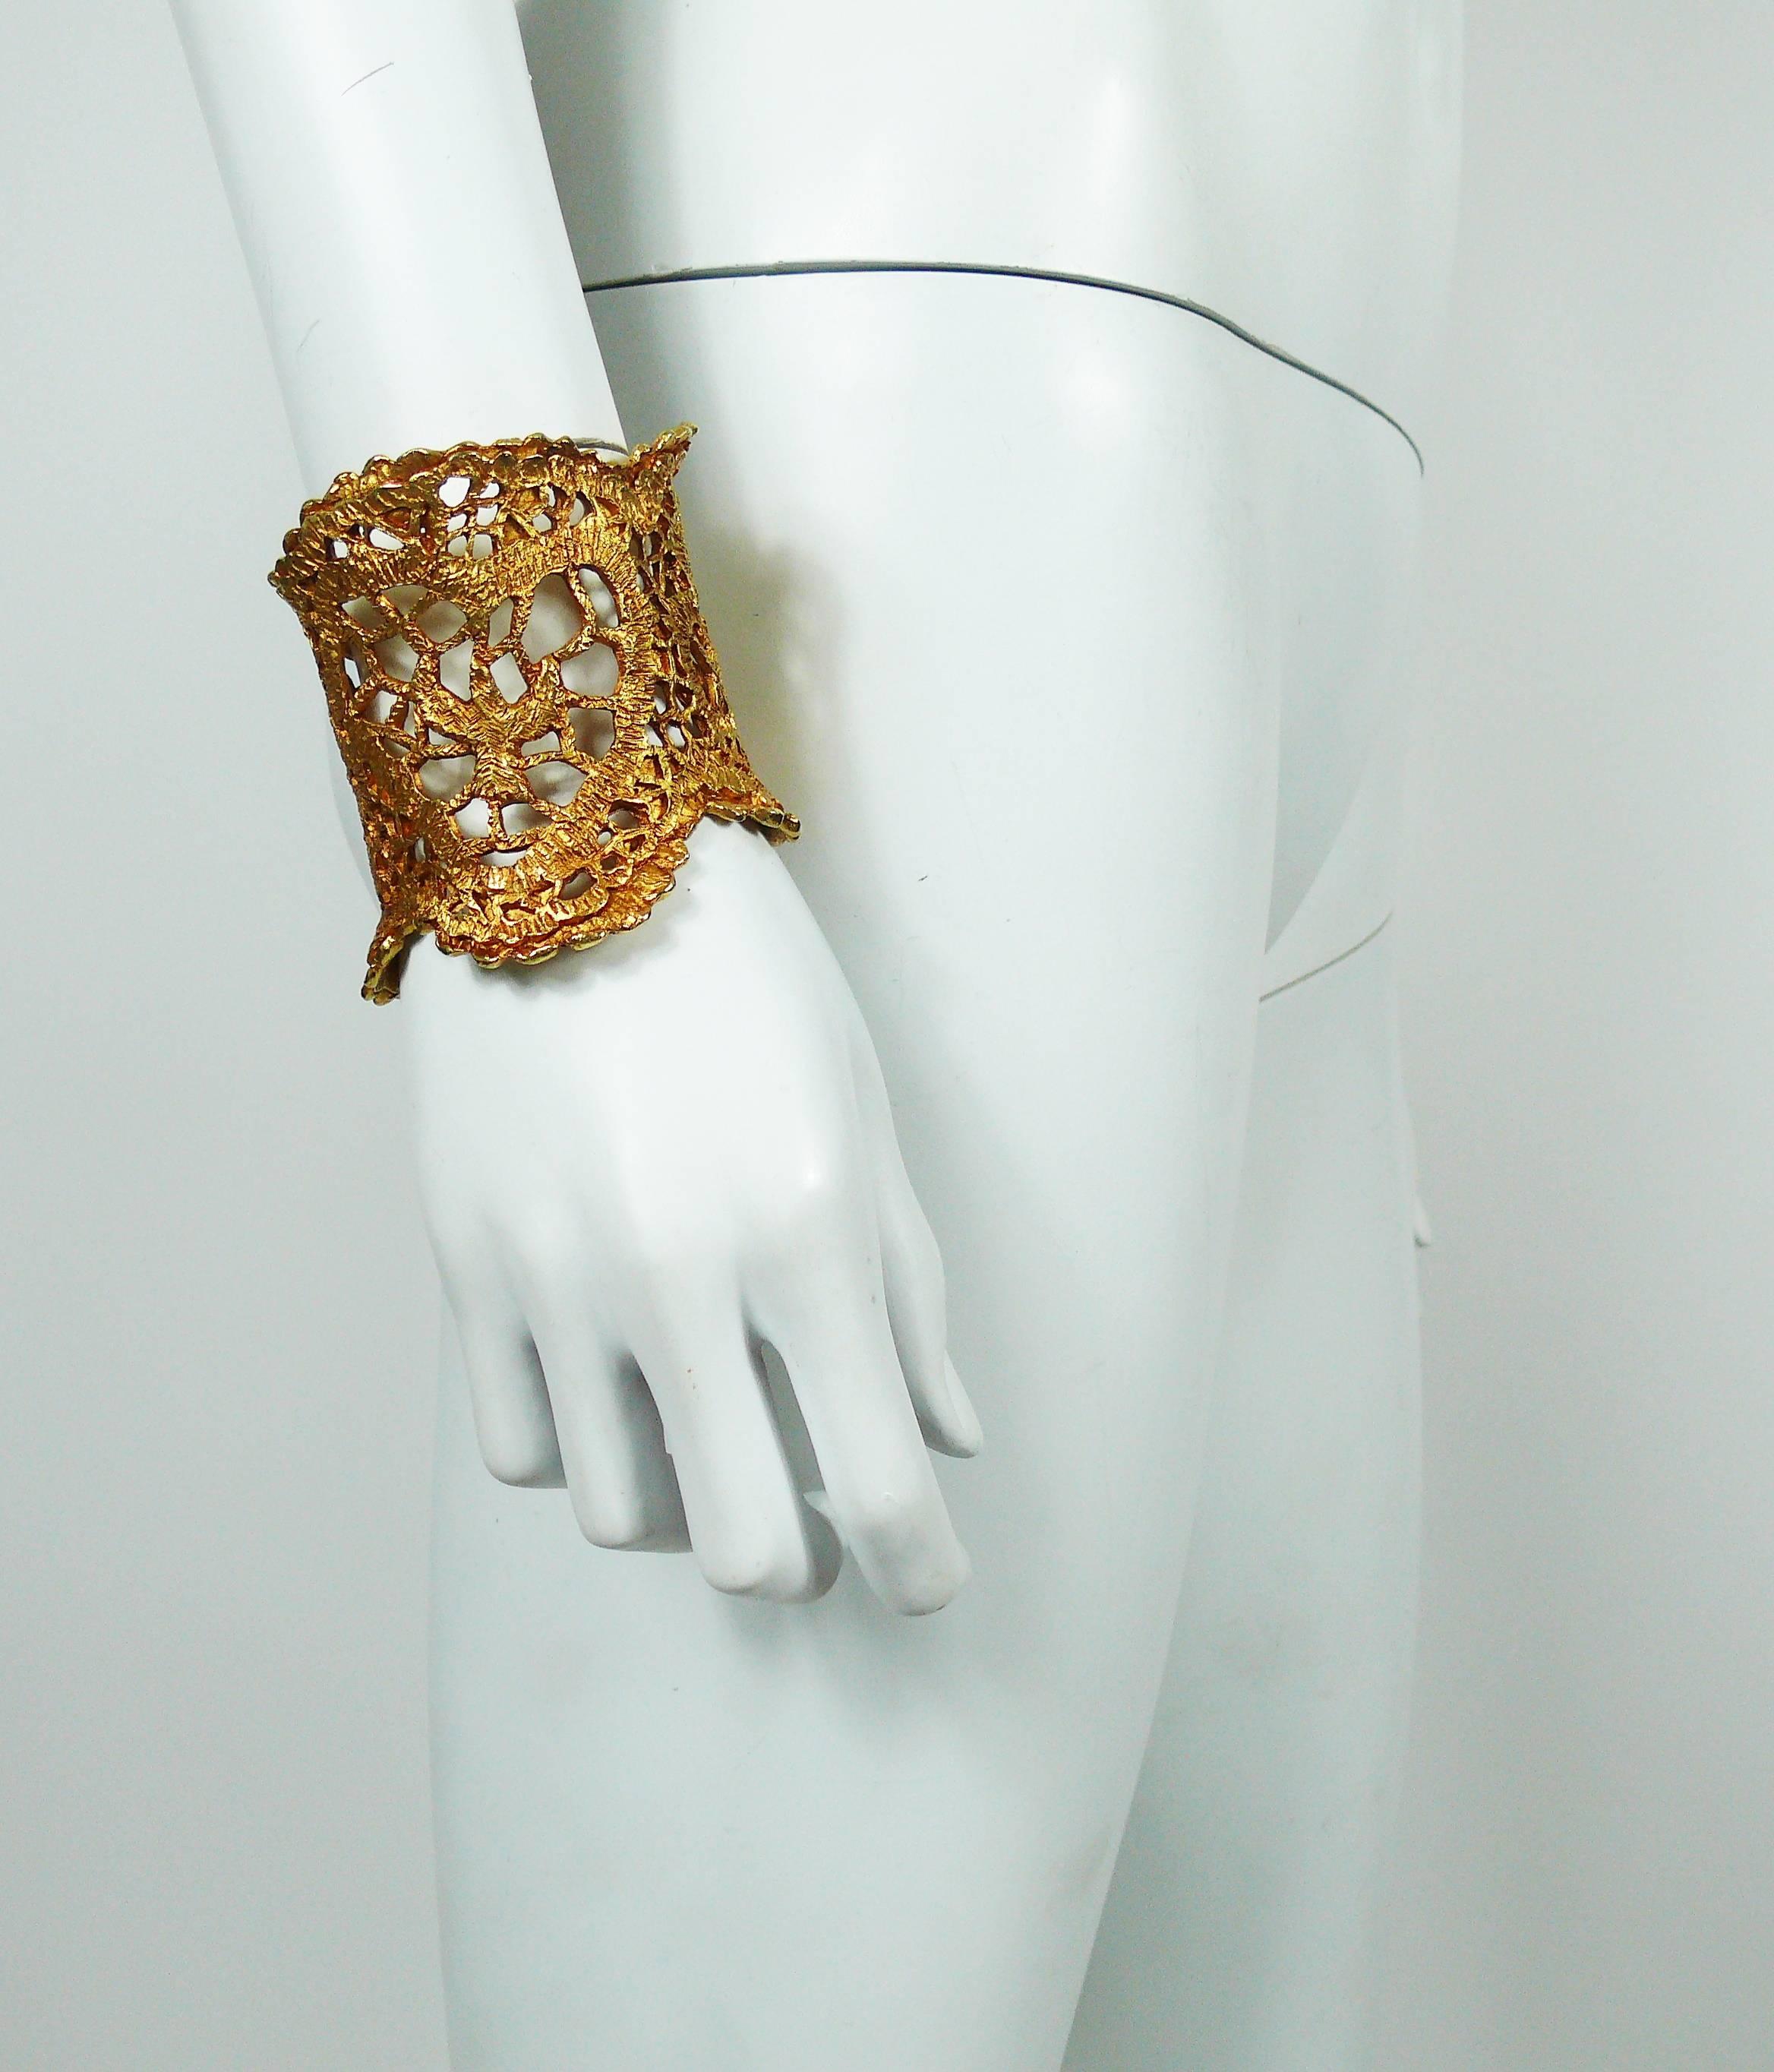 CHRISTIAN LACROIX vintage antiqued gold tone openwork cuff bracelet featuring a gorgeous lace-like design.

Marked CHRISTIAN LACROIX CL Made in France.

Indicative measurements : max. width approx. 7.5 cm (2.95 inches).

JEWELRY CONDITION CHART
-